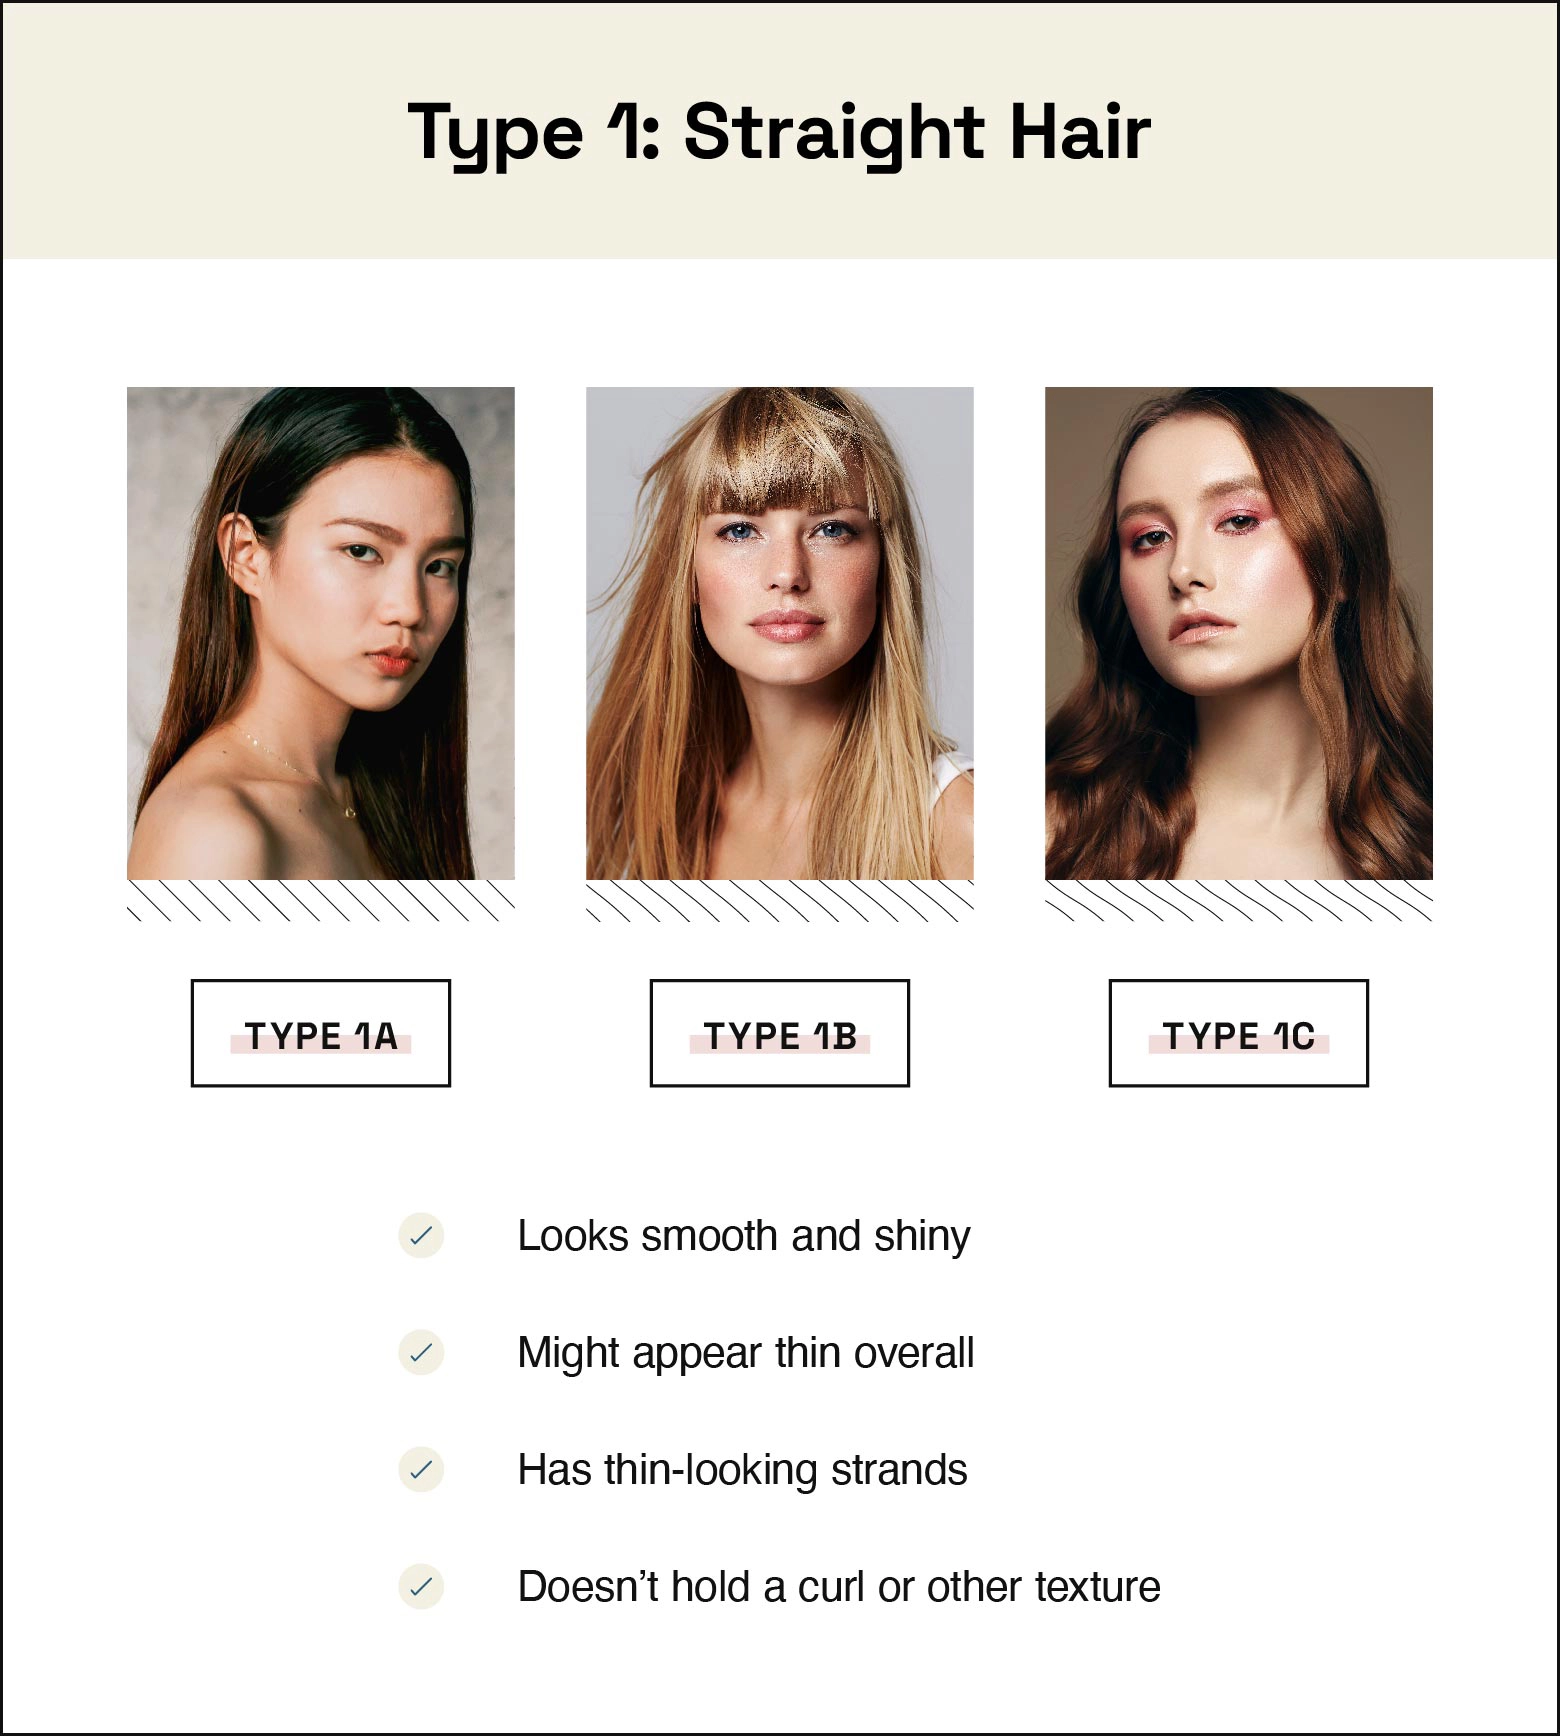 Type 1 hair is straight hair that looks smooth and shiny, may appear thin overall, has thin-looking strands, and doesn’t hold a curl or other texture.